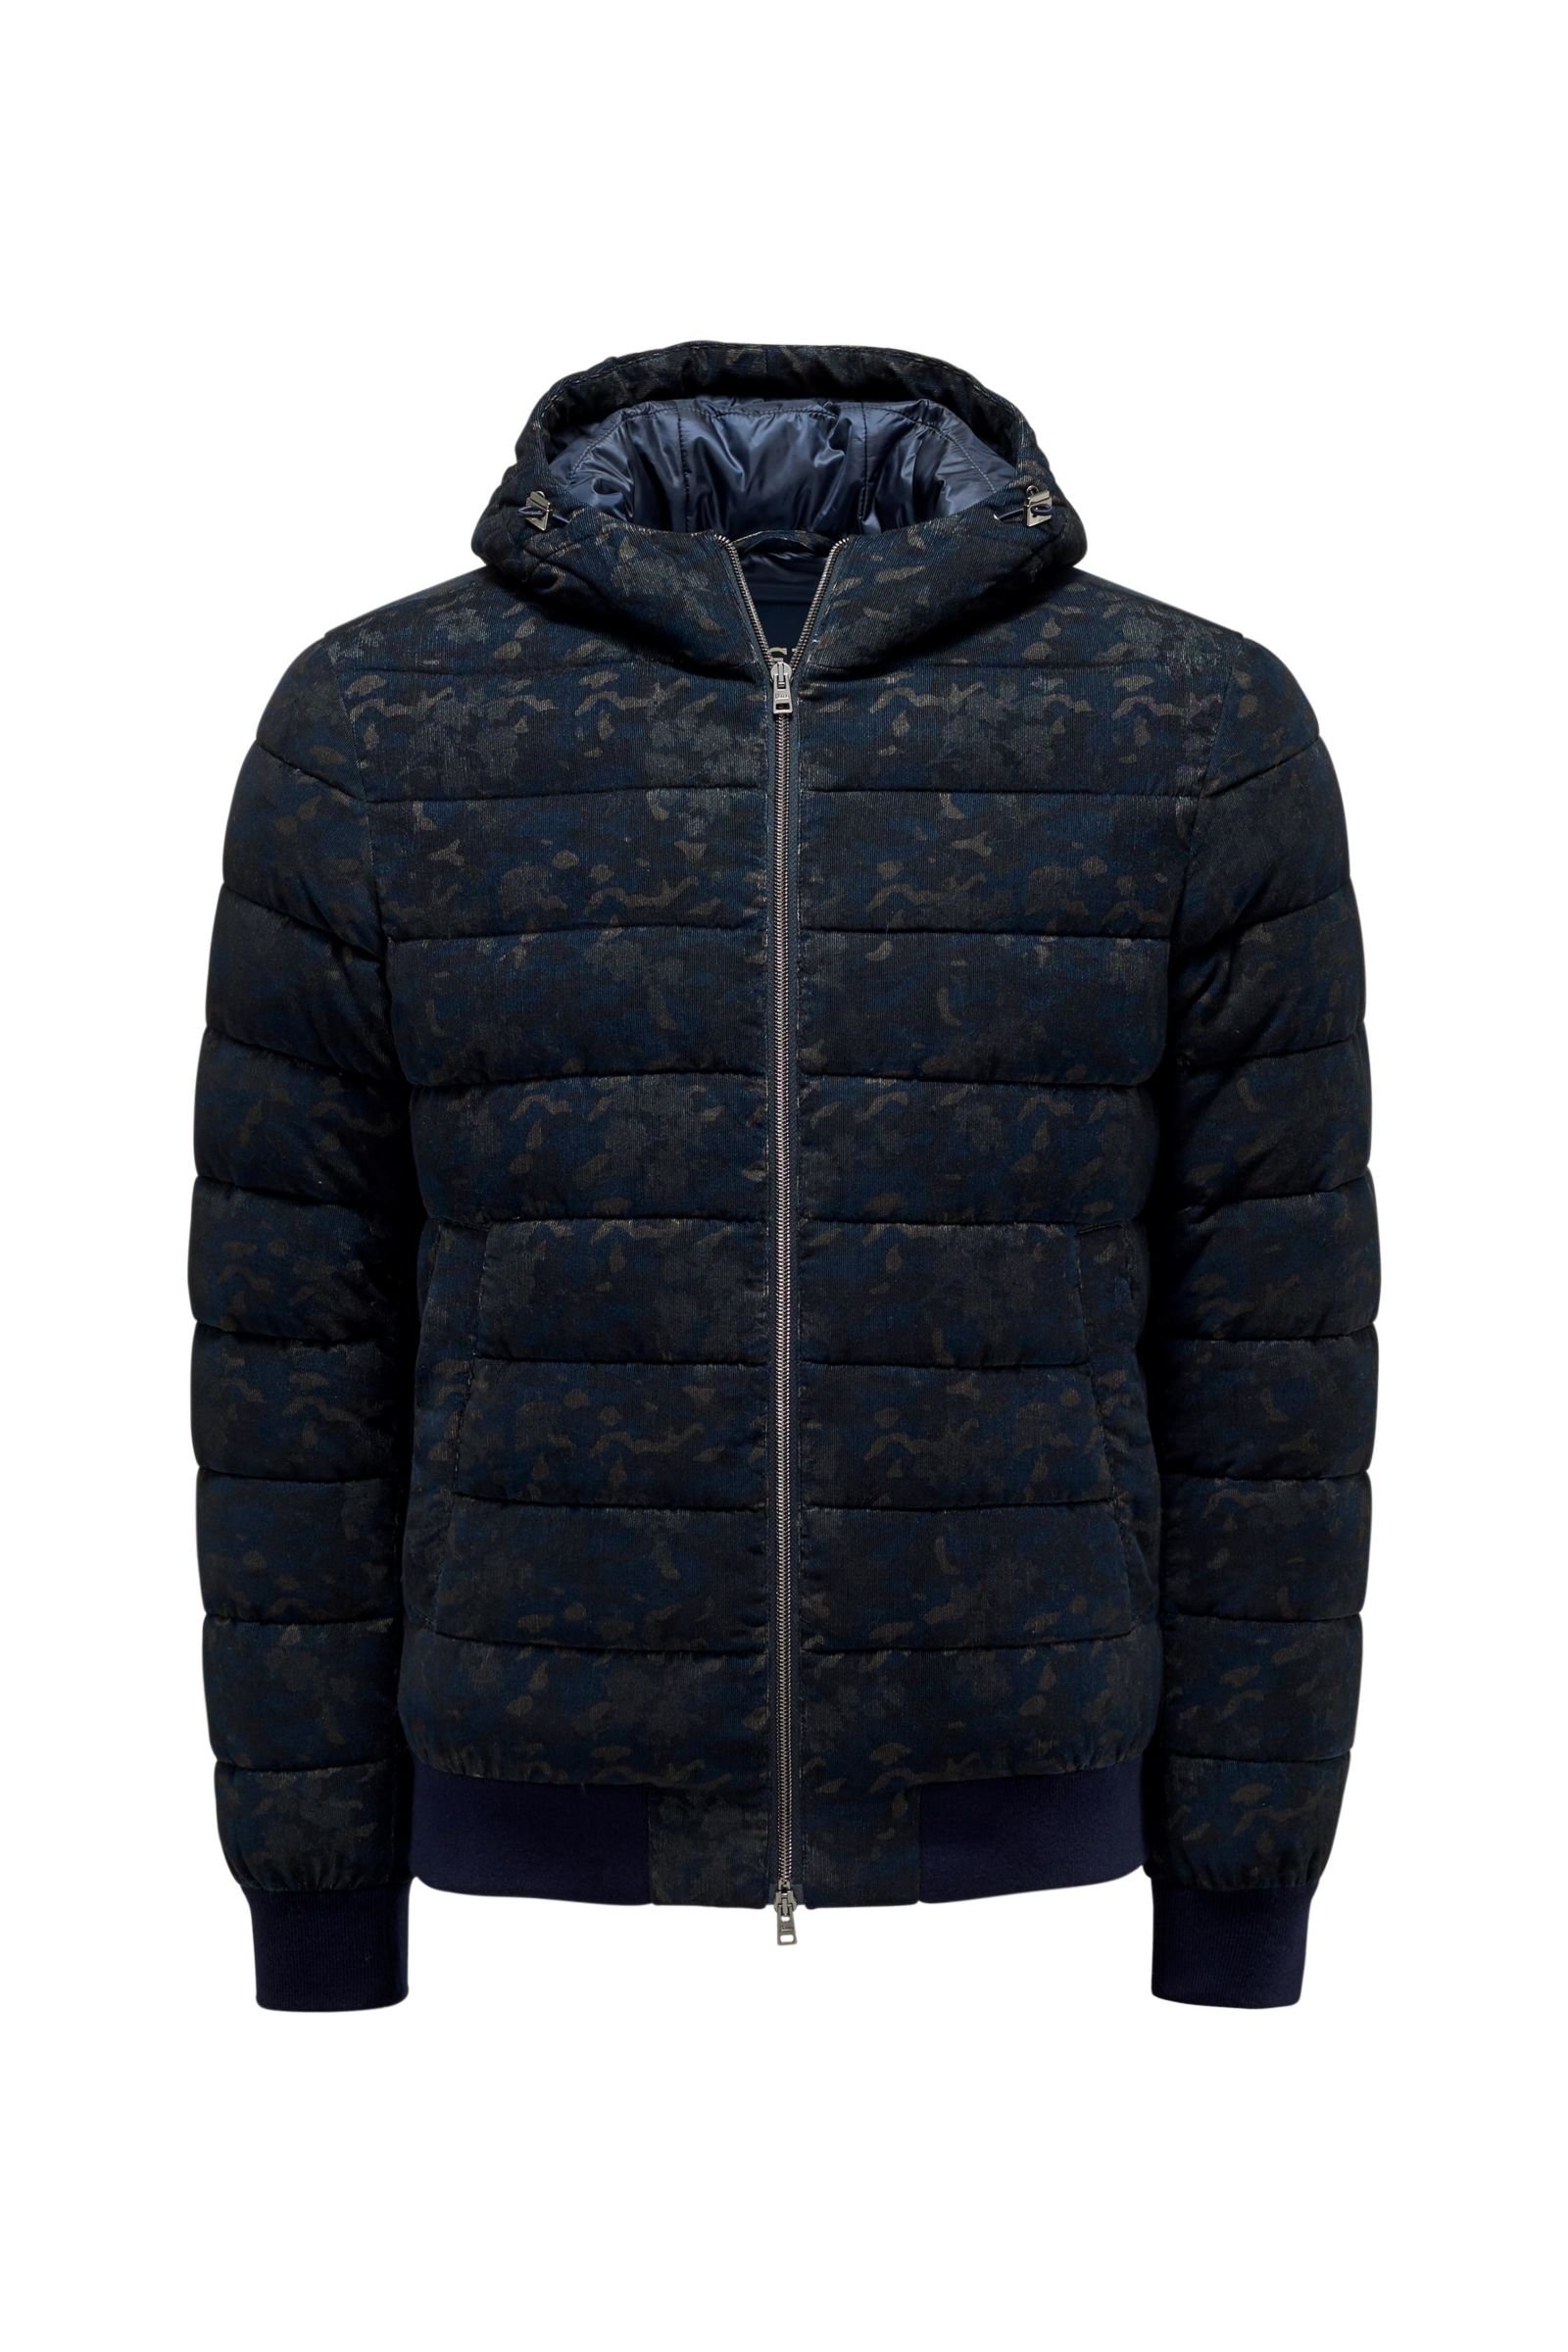 Quilted bomber jacket navy, patterned